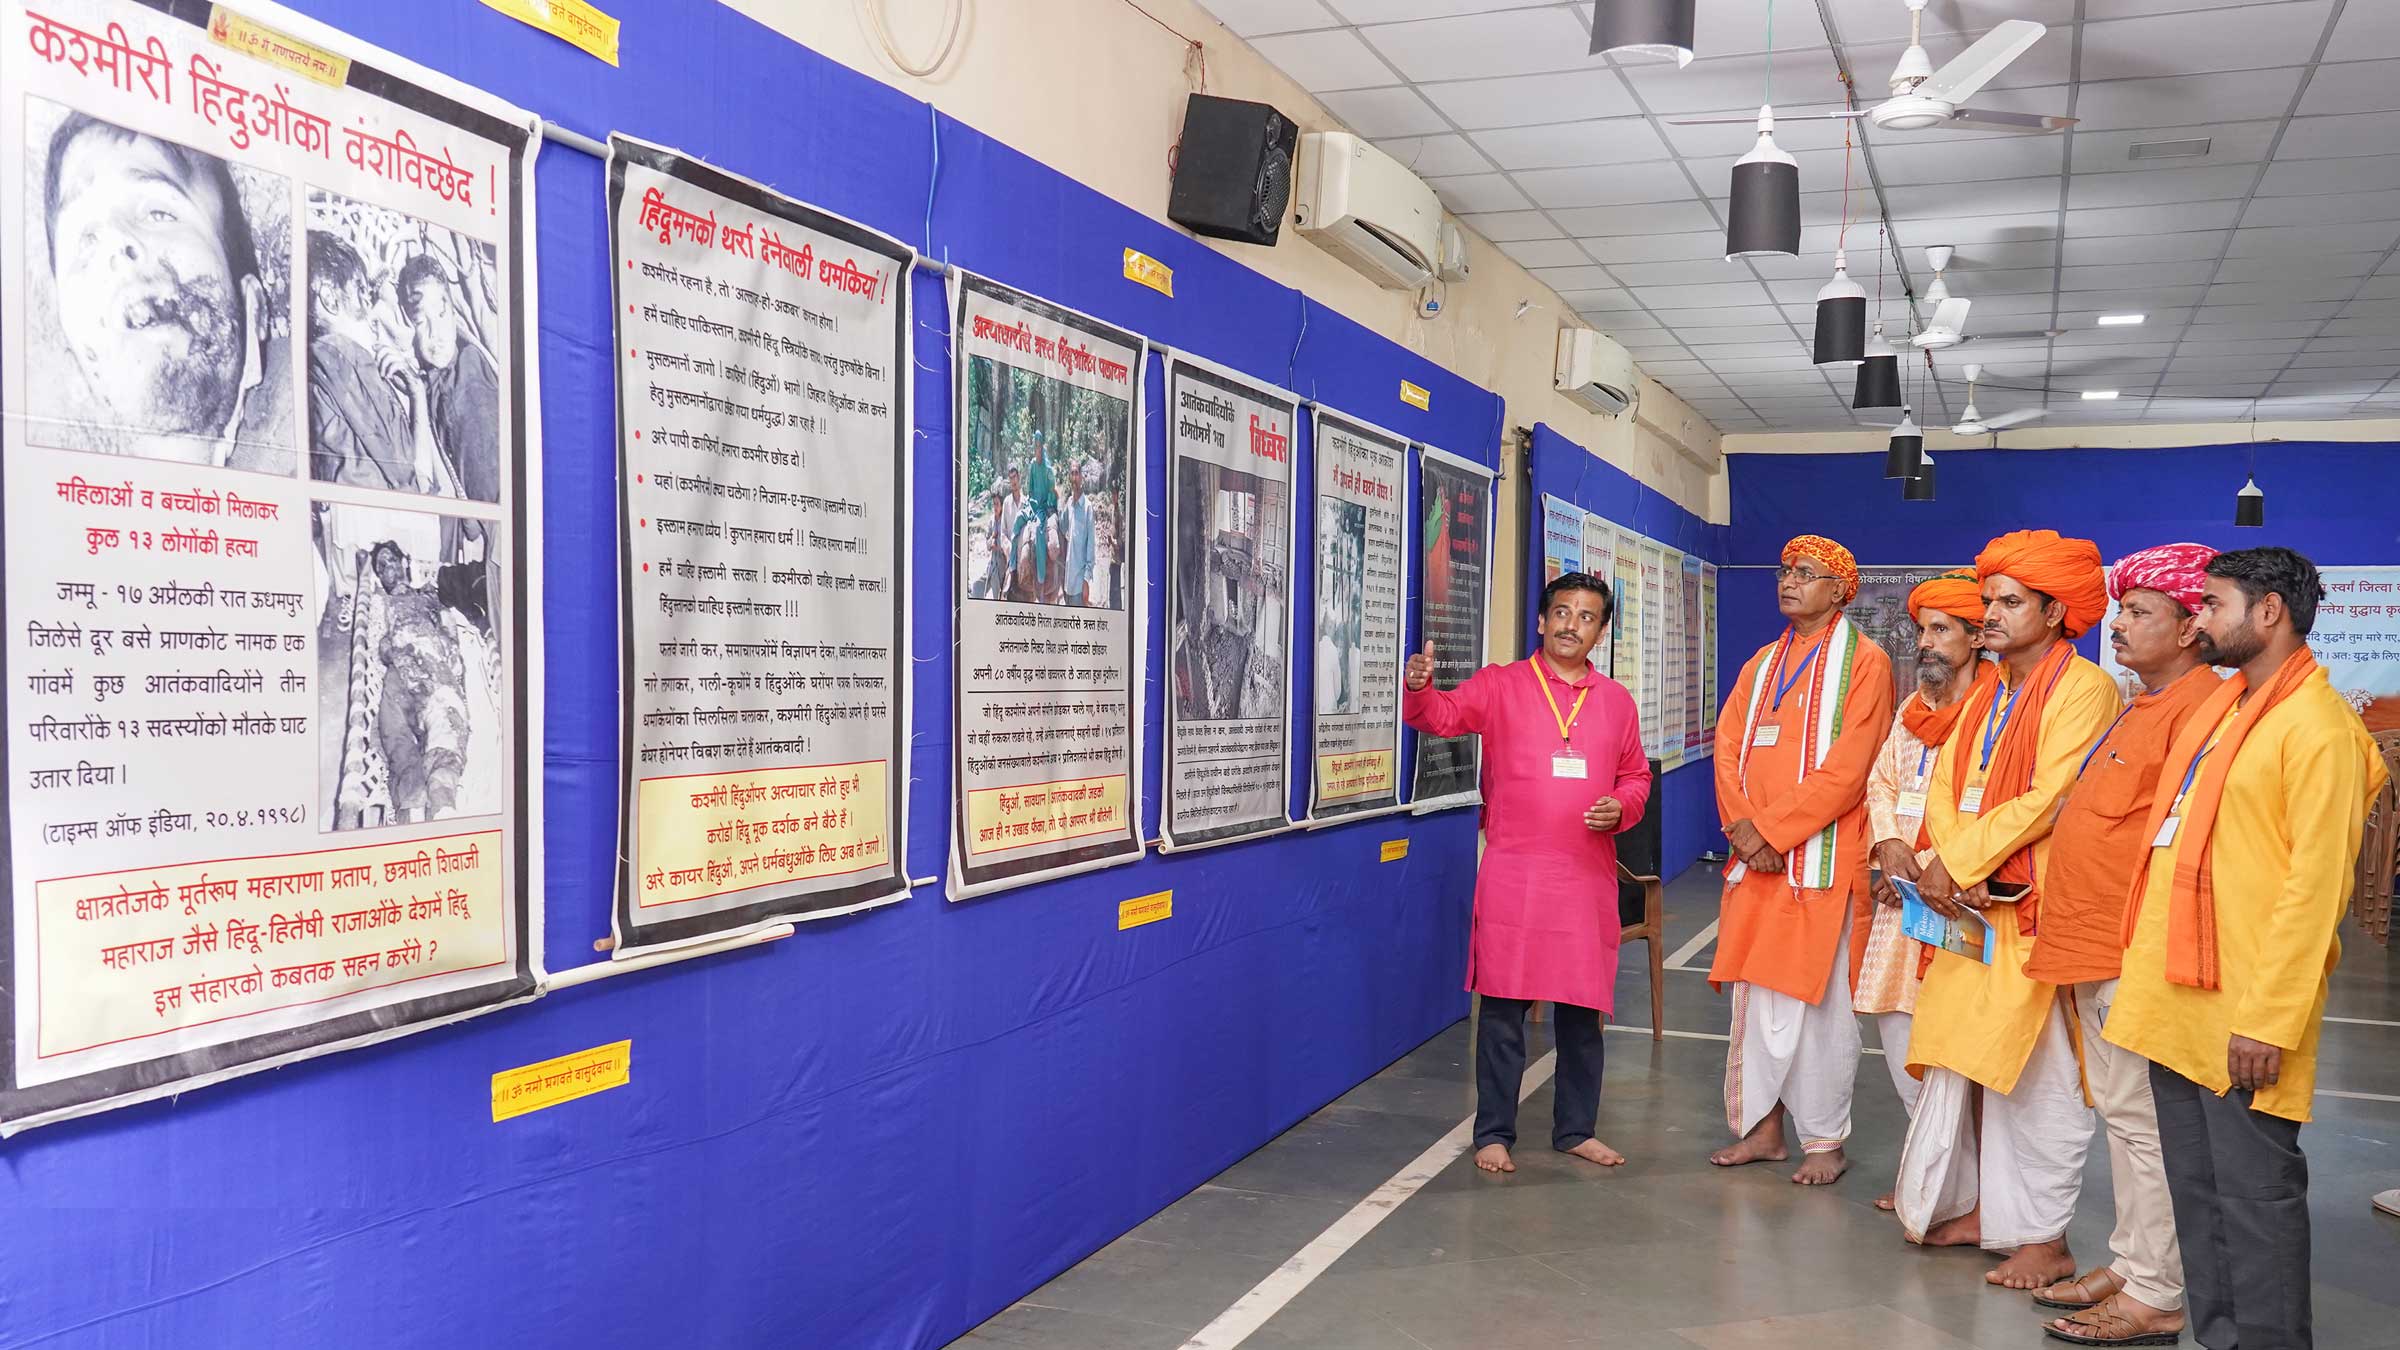 Volunteers of Hindu Janajagruti Samiti showing the Devout Hindus posters in an exhibition that provides information on the atrocities Kashmiri Hindus have faced